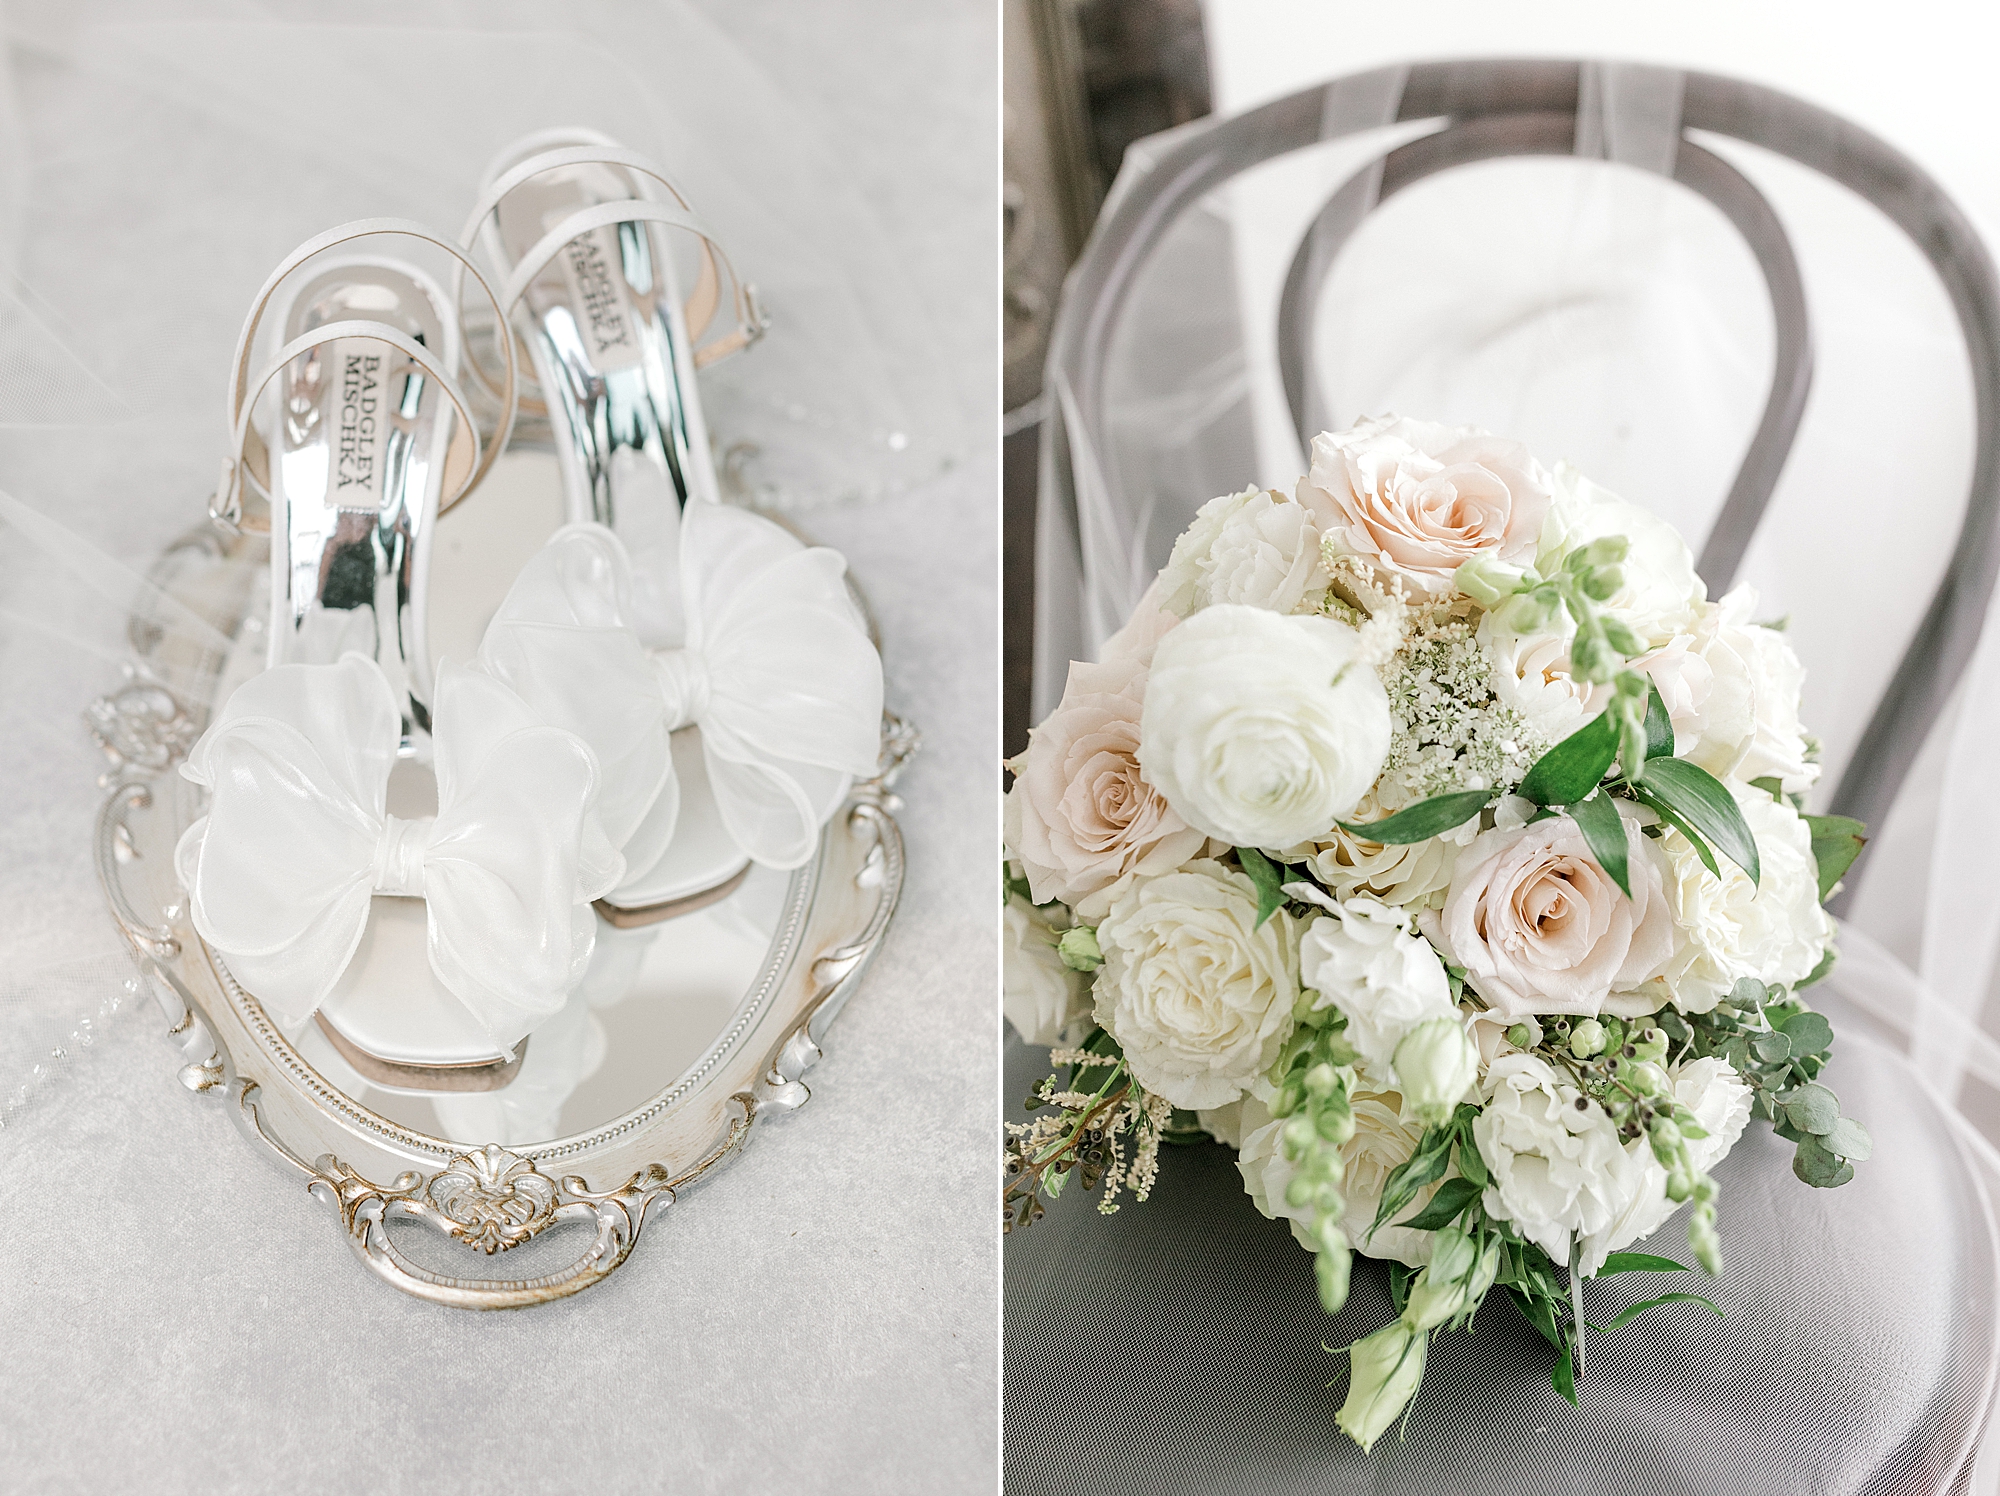 bride's silver shoes on silver tray with bouquet of white and peach roses